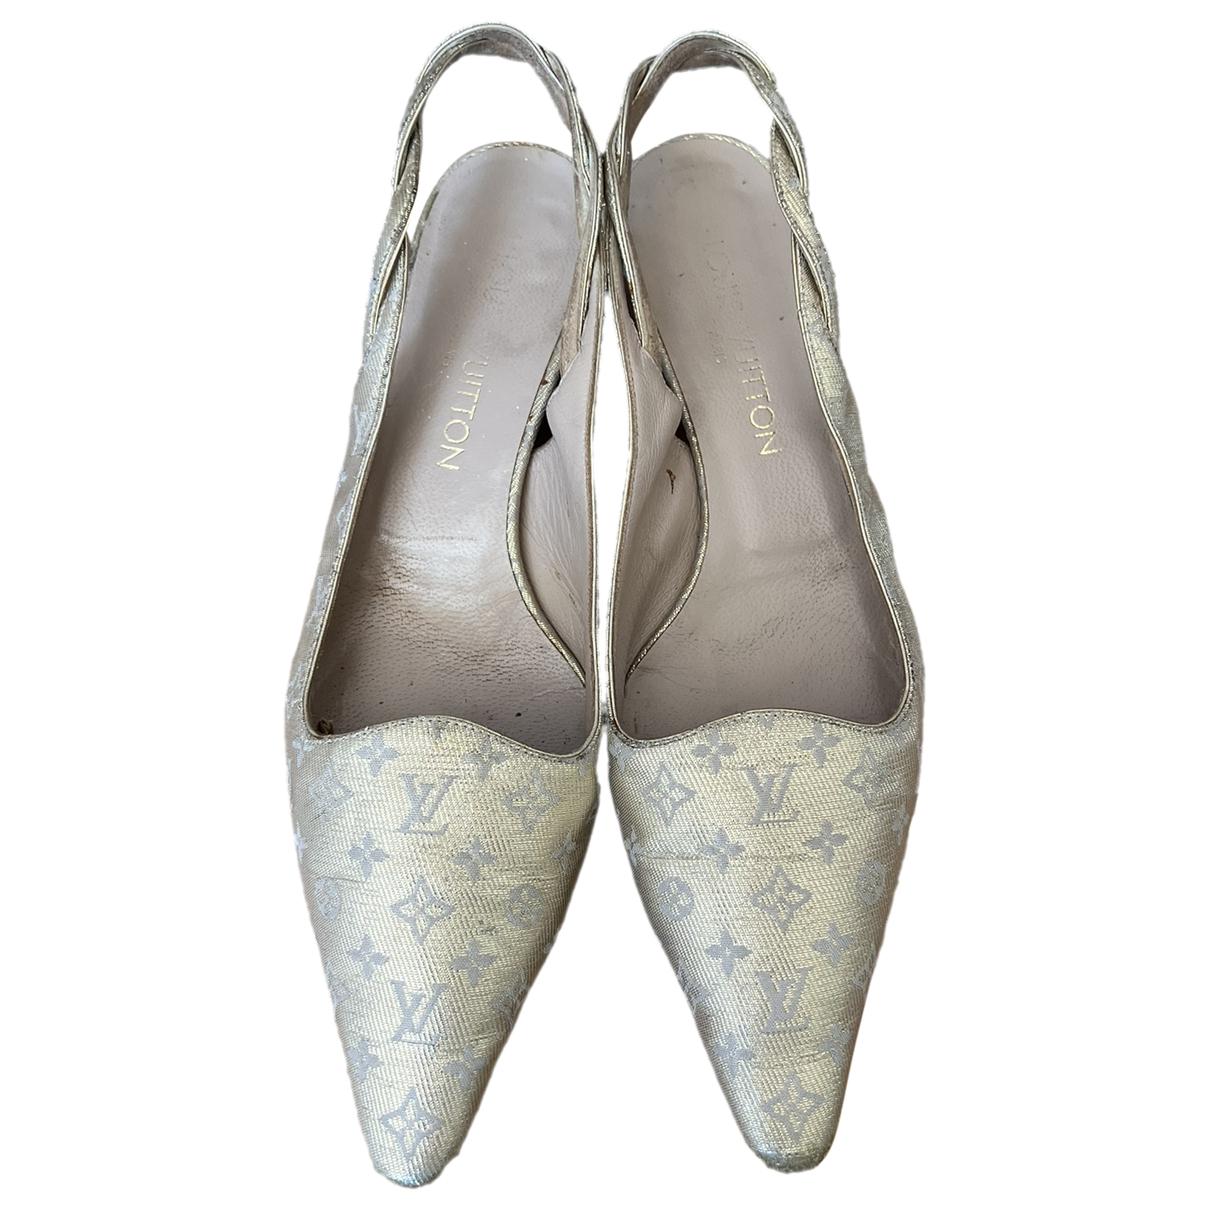 Louis Vuitton Women's Archlight Slingback Pumps Leather and Fabric Blue  1952205